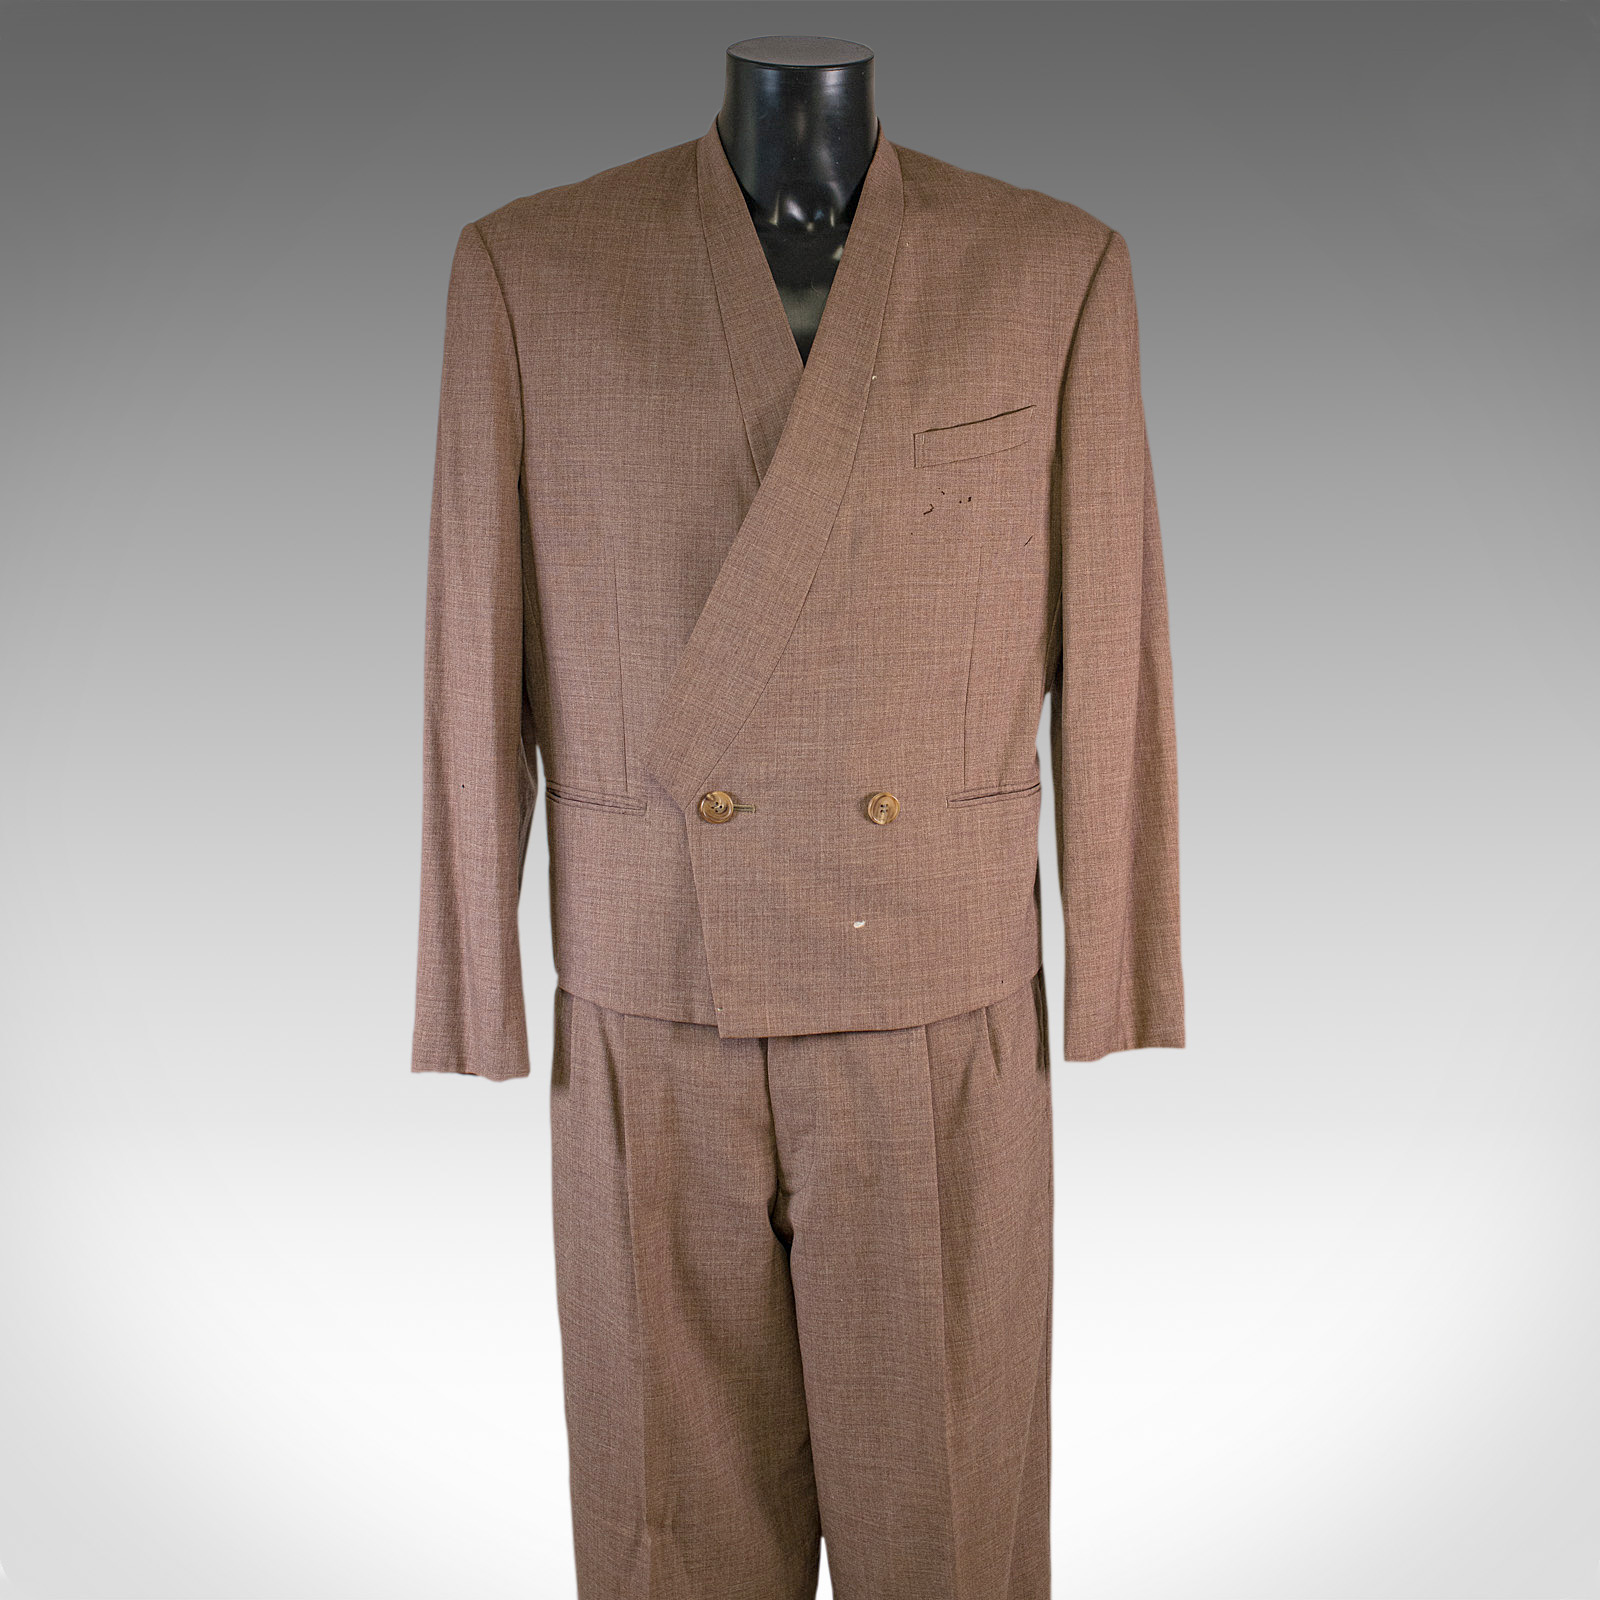 David Bowie interest. An Issey Miyake two piece suit from the deceased estate of one Steve Strange